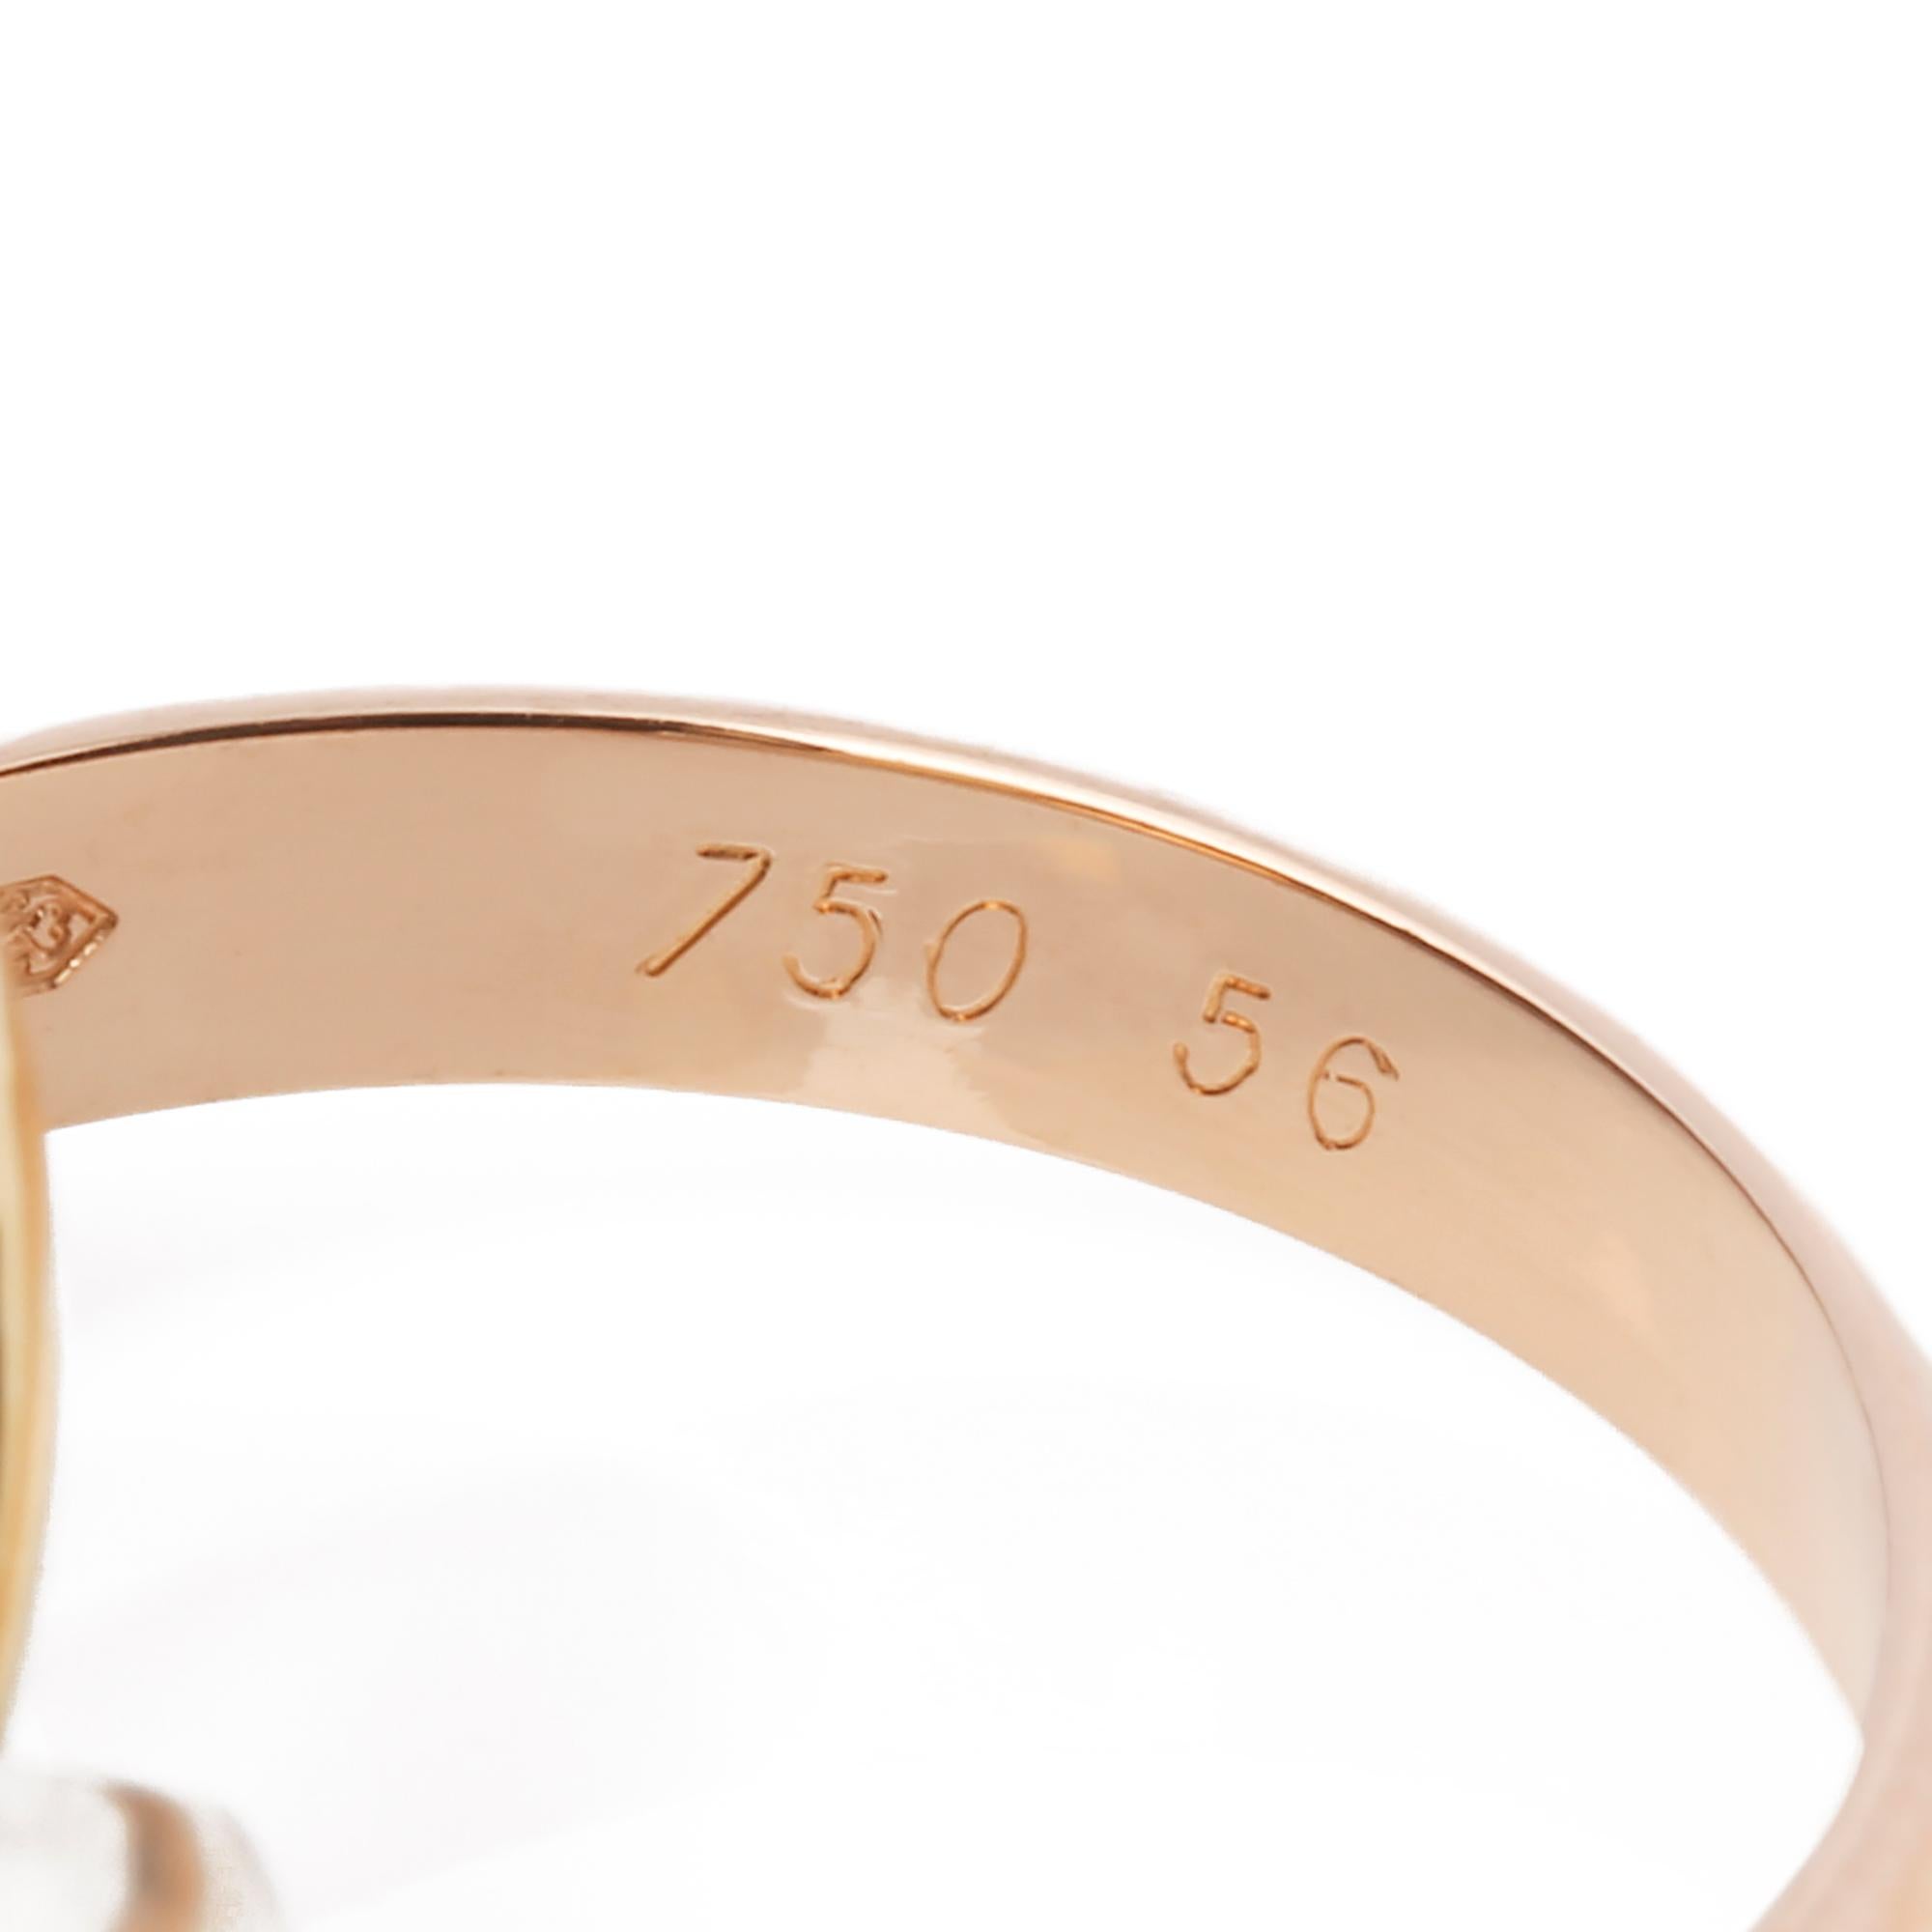 This ring by Cartier is from their Trinity collection and features 18k yellow, white and rose gold interlinking bands. UK ring size P. EU ring size 56. US ring size 7 1/2. This ring cannot be re sized. Complete with a Xupes presentation box. Our